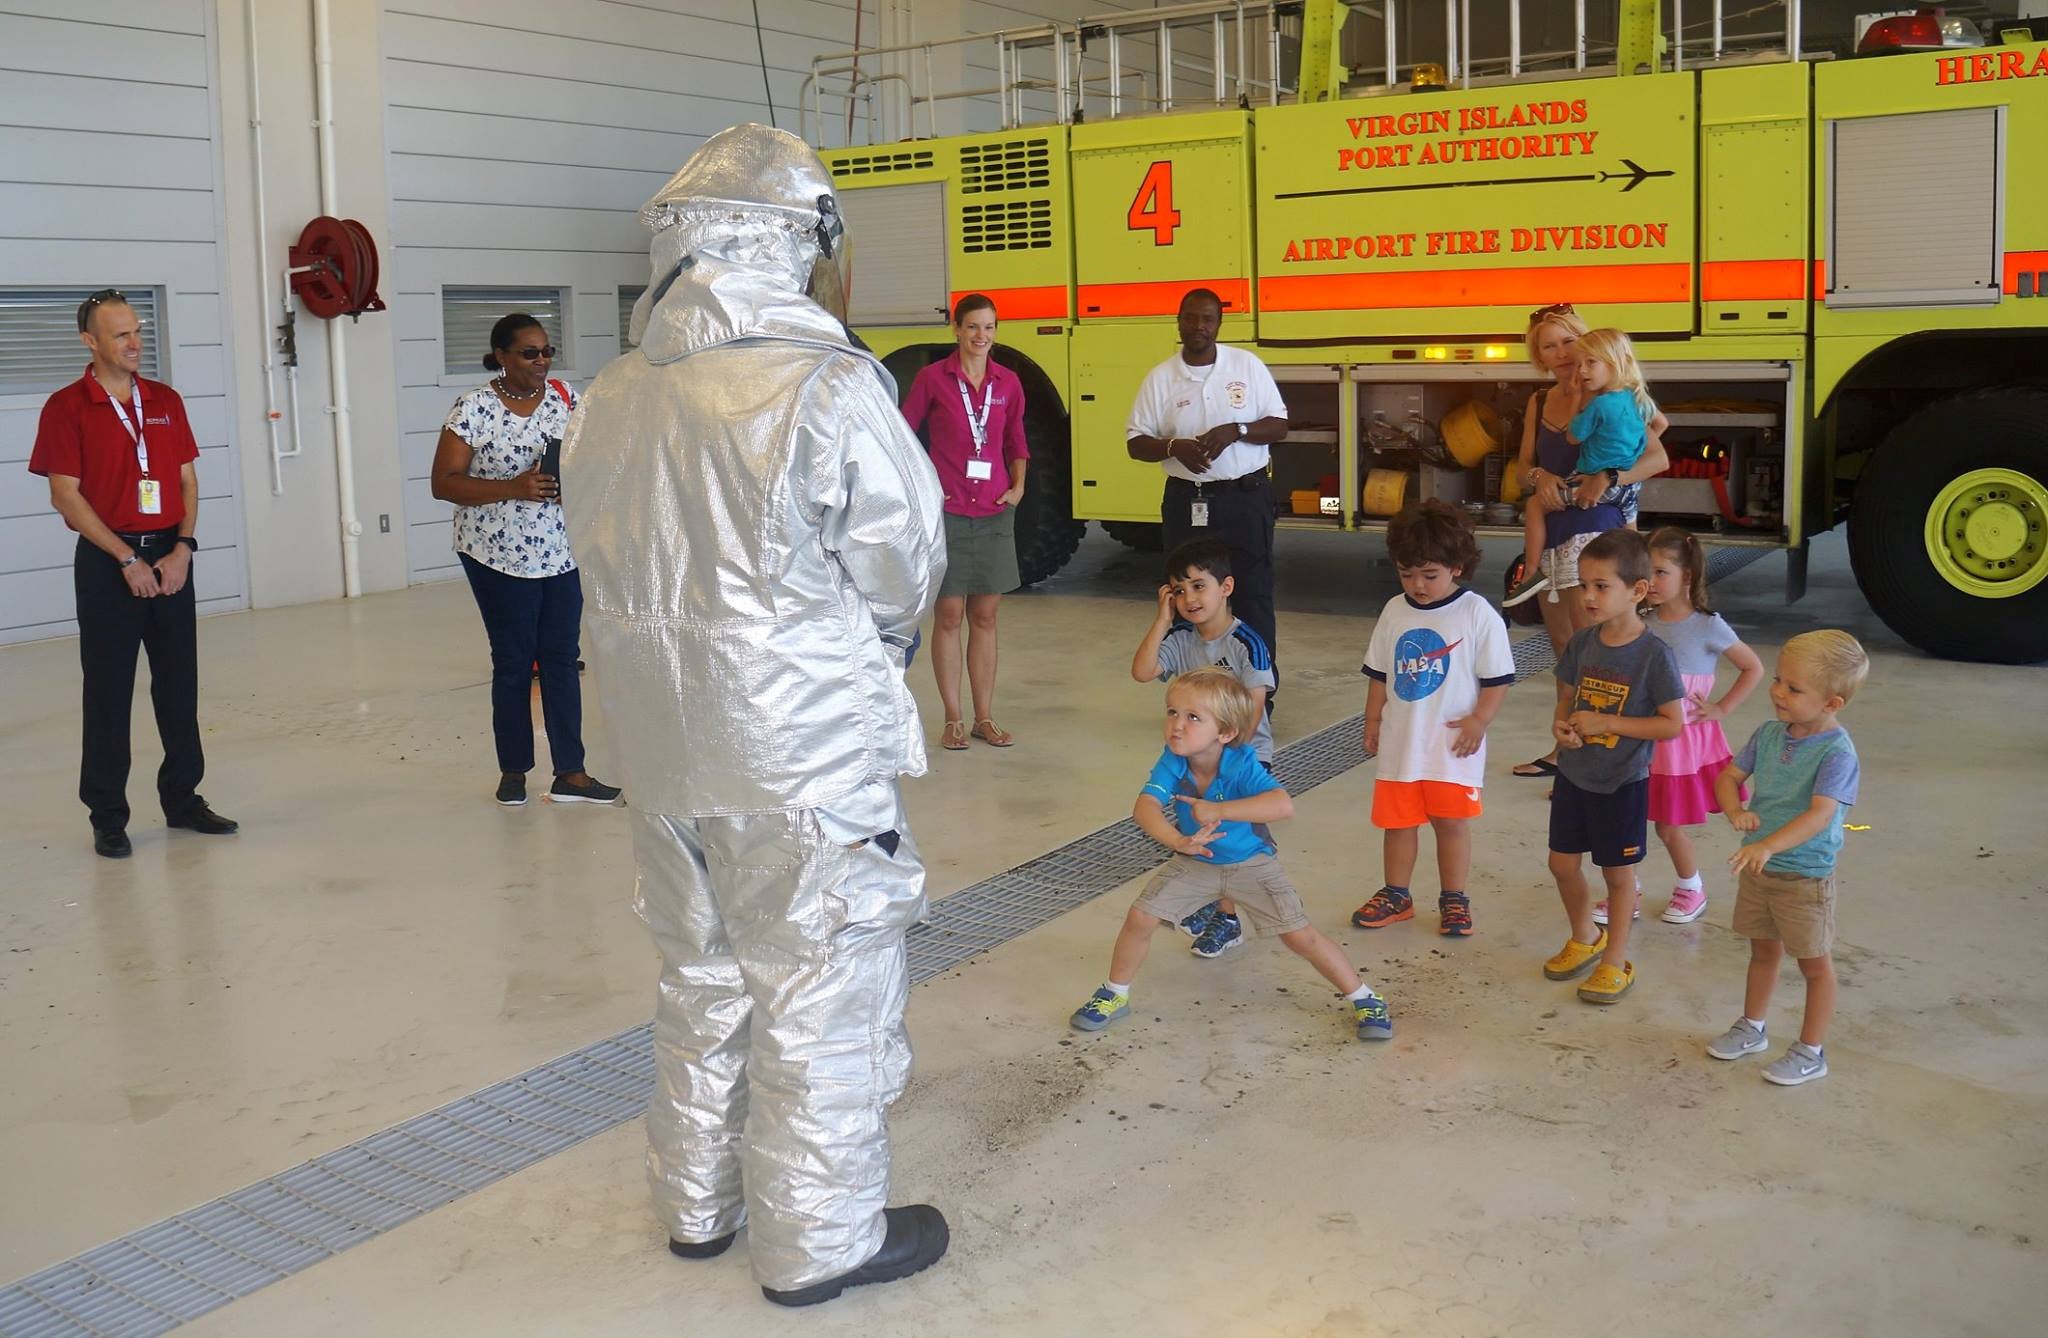 VIPA Demonstrates Firefighting Skills To Two Groups Of Students On St. Croix